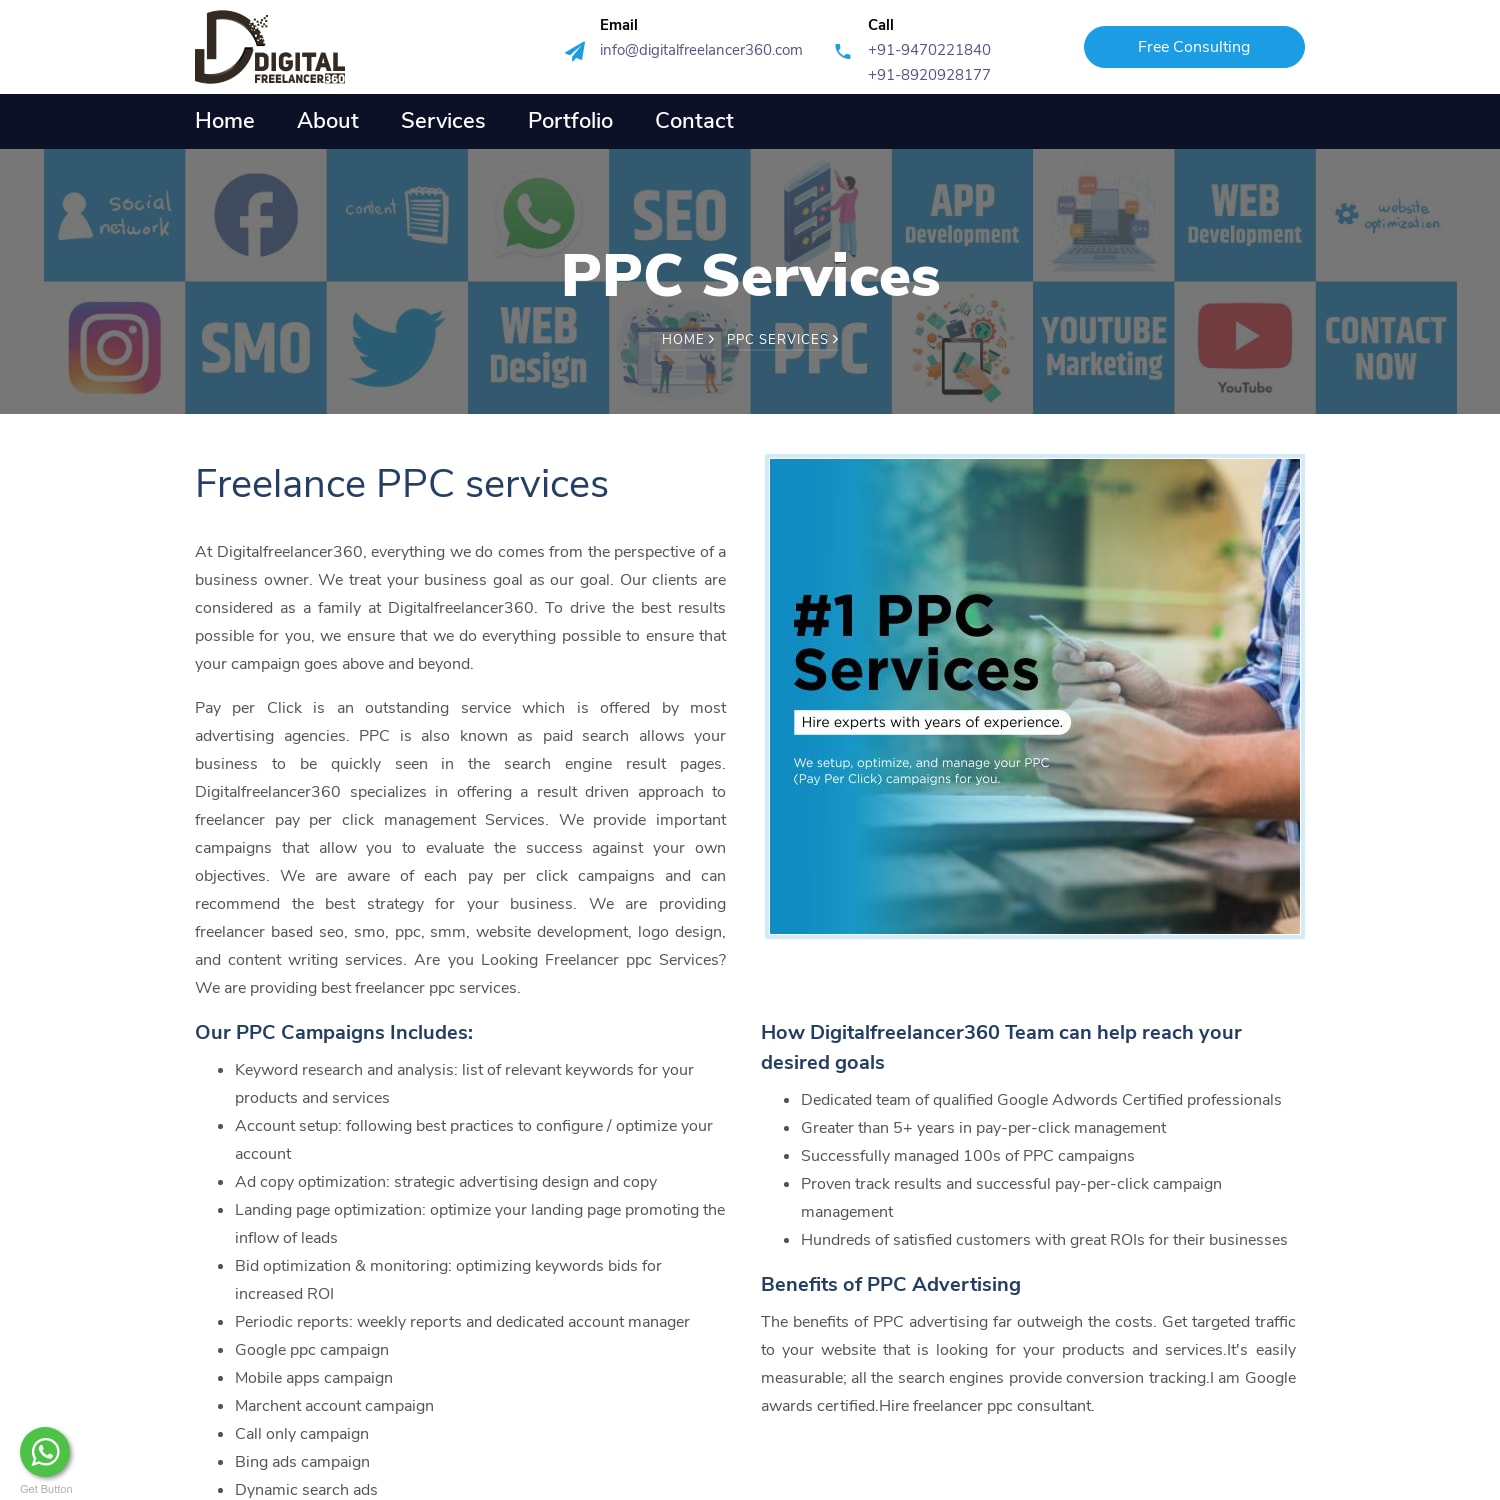 Suresh Jaiswal - PPC Freelancer, SEM service providers, Freelance Adwords Specialist and google ads freelancer. I am based in delhi are you looking PPC Freelancer, facebook ads, linkedin ads and twitter ads. Let me help increase website visits and generate more sales & leads.